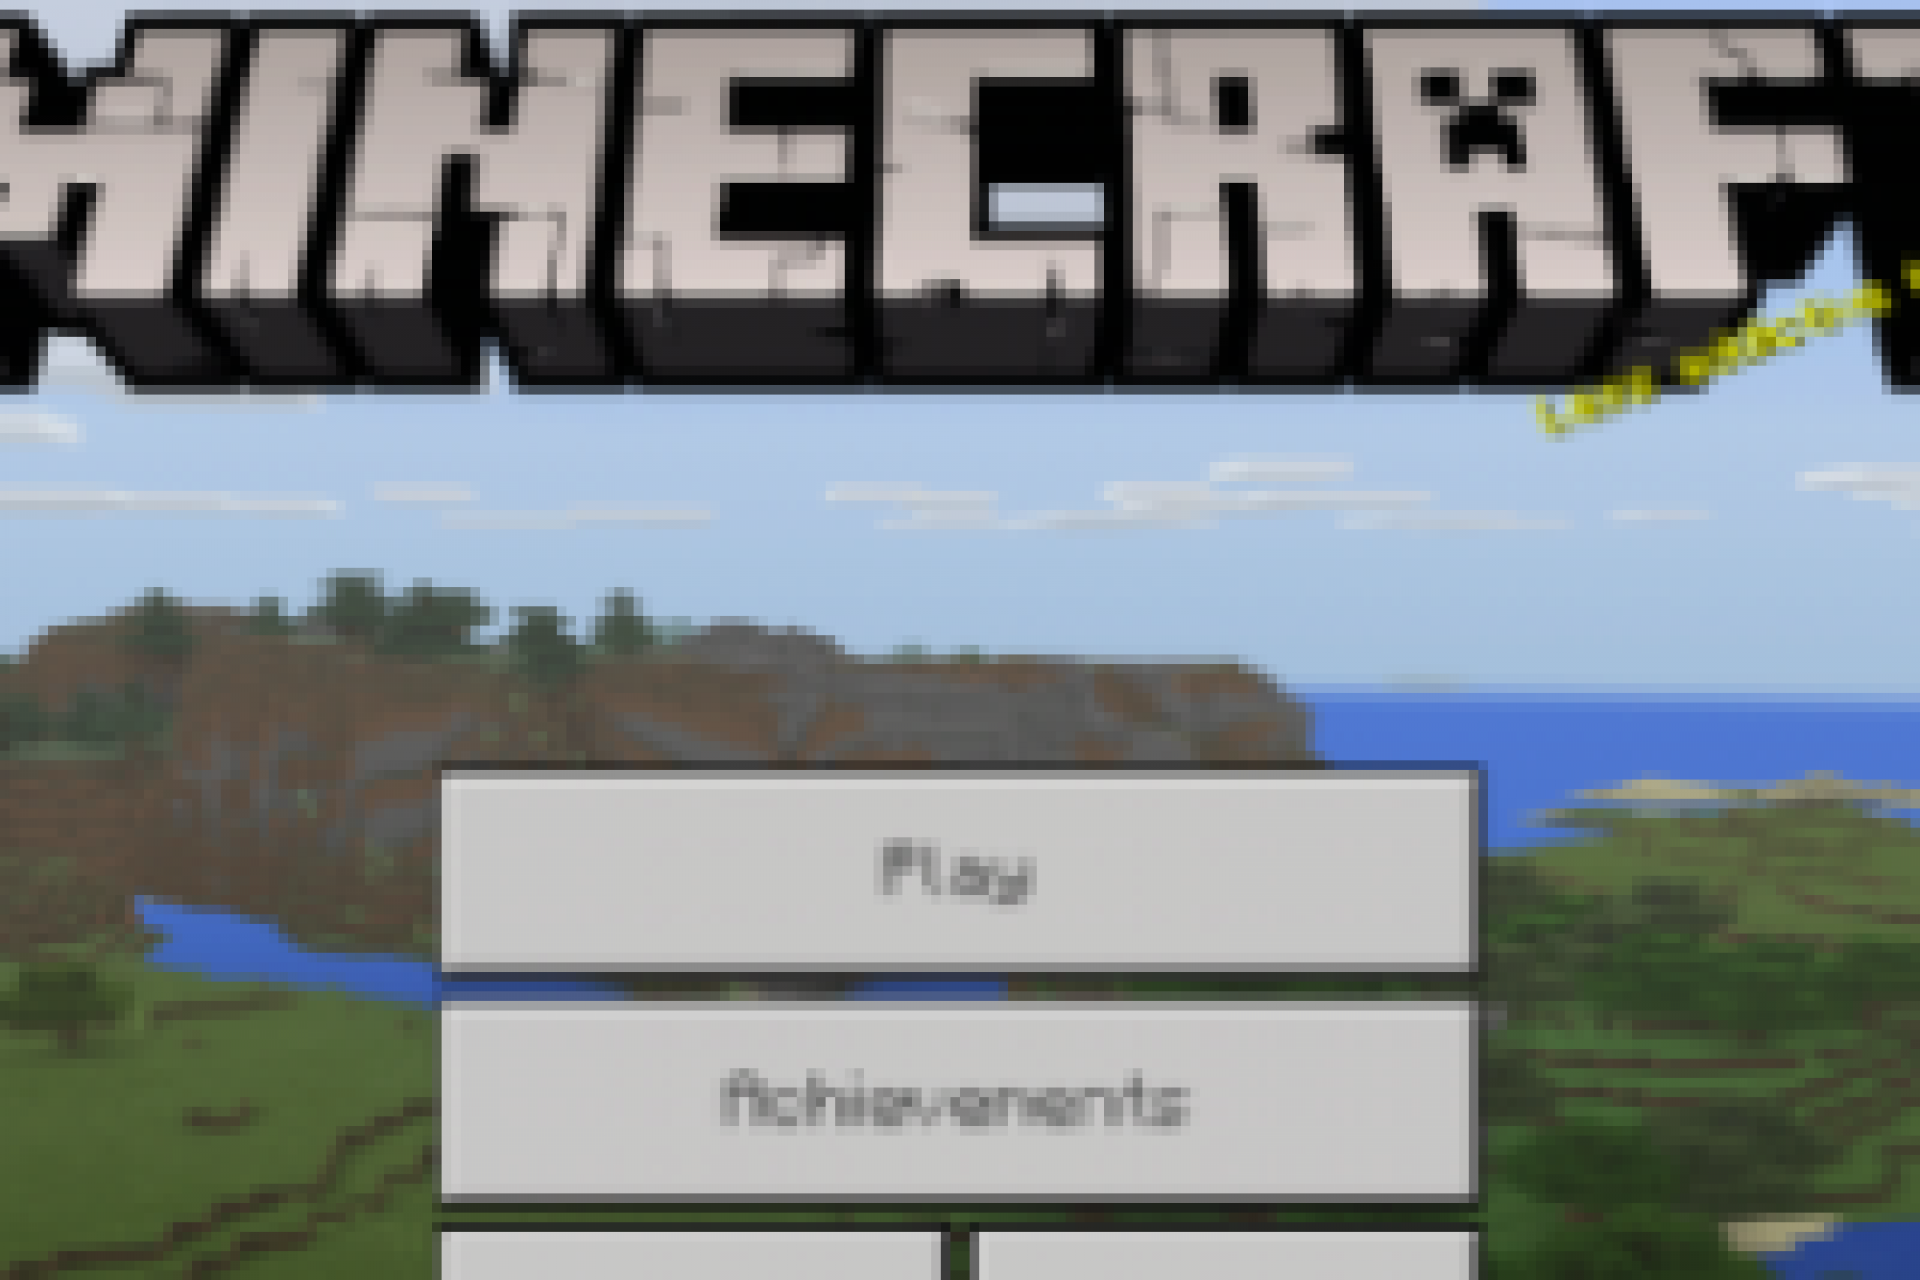 Download Minecraft Pe 1 2 Apk Free Better Together